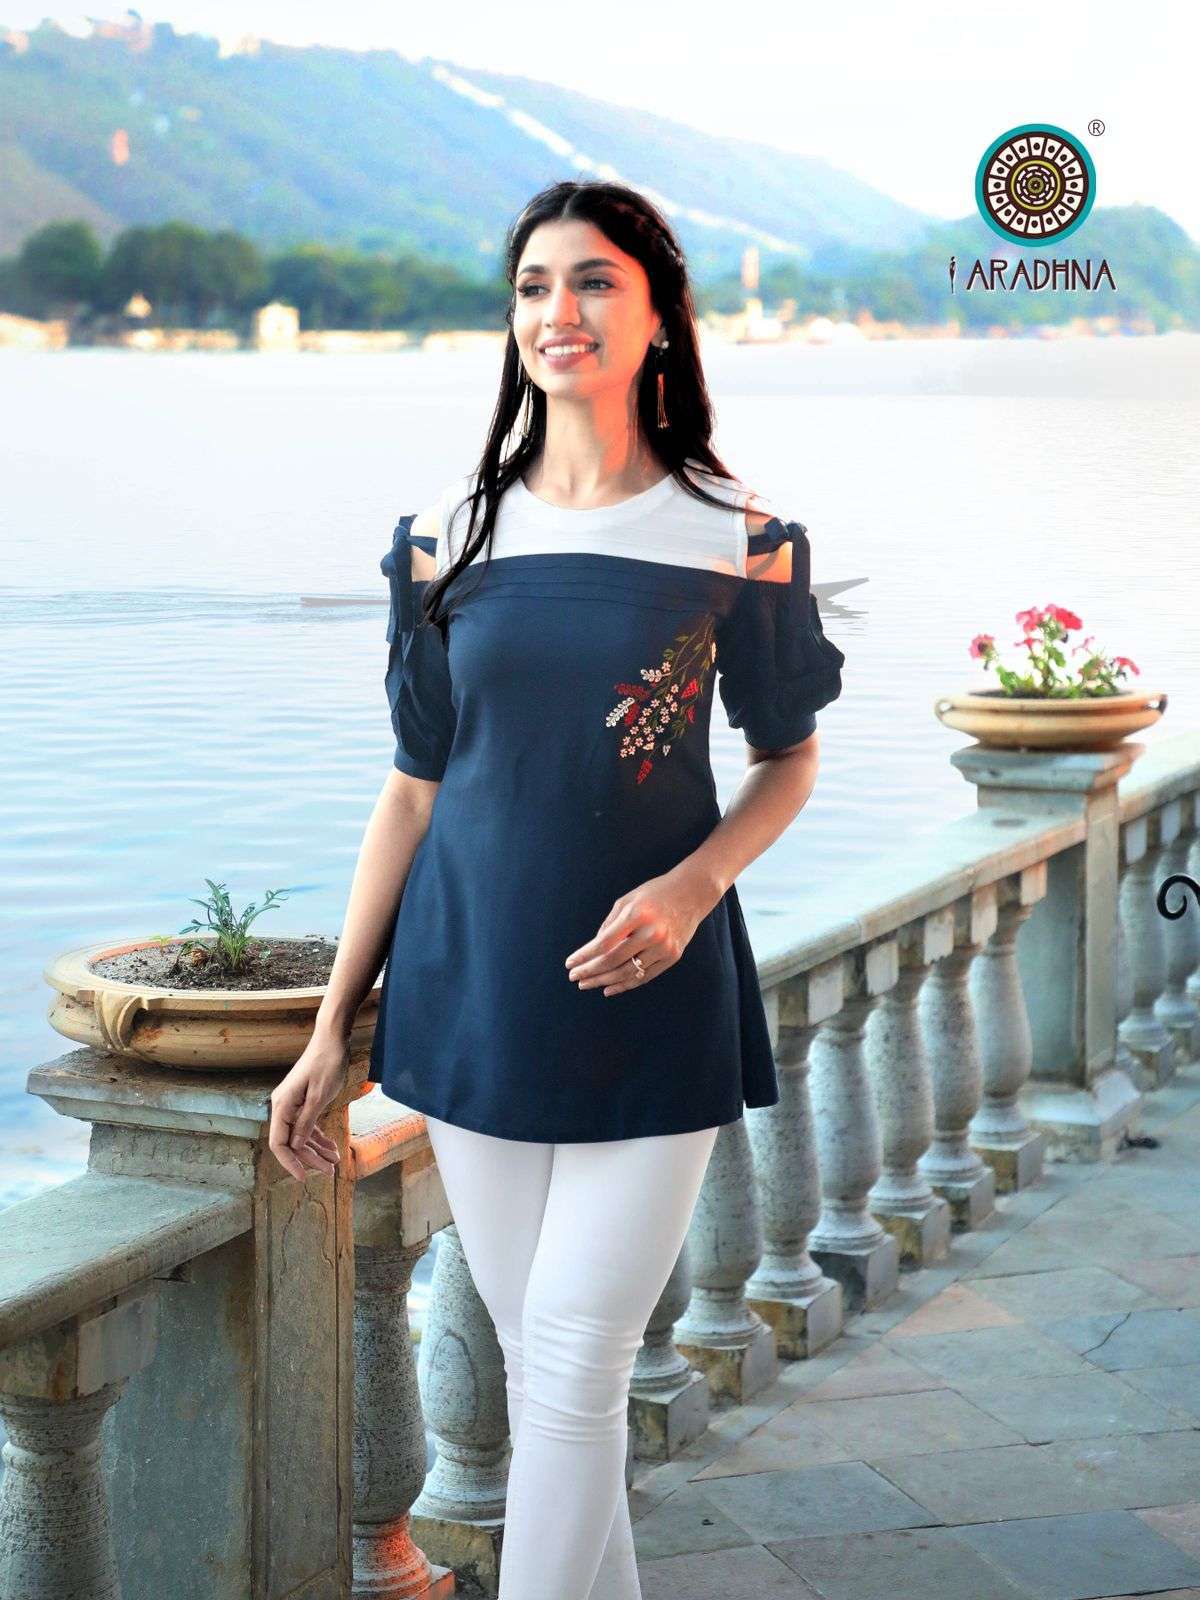 ARADHNA PRESENTS CLASSIC VOL 8 RAYON EMBROIDERY WHOLESALE WESTERN TOP